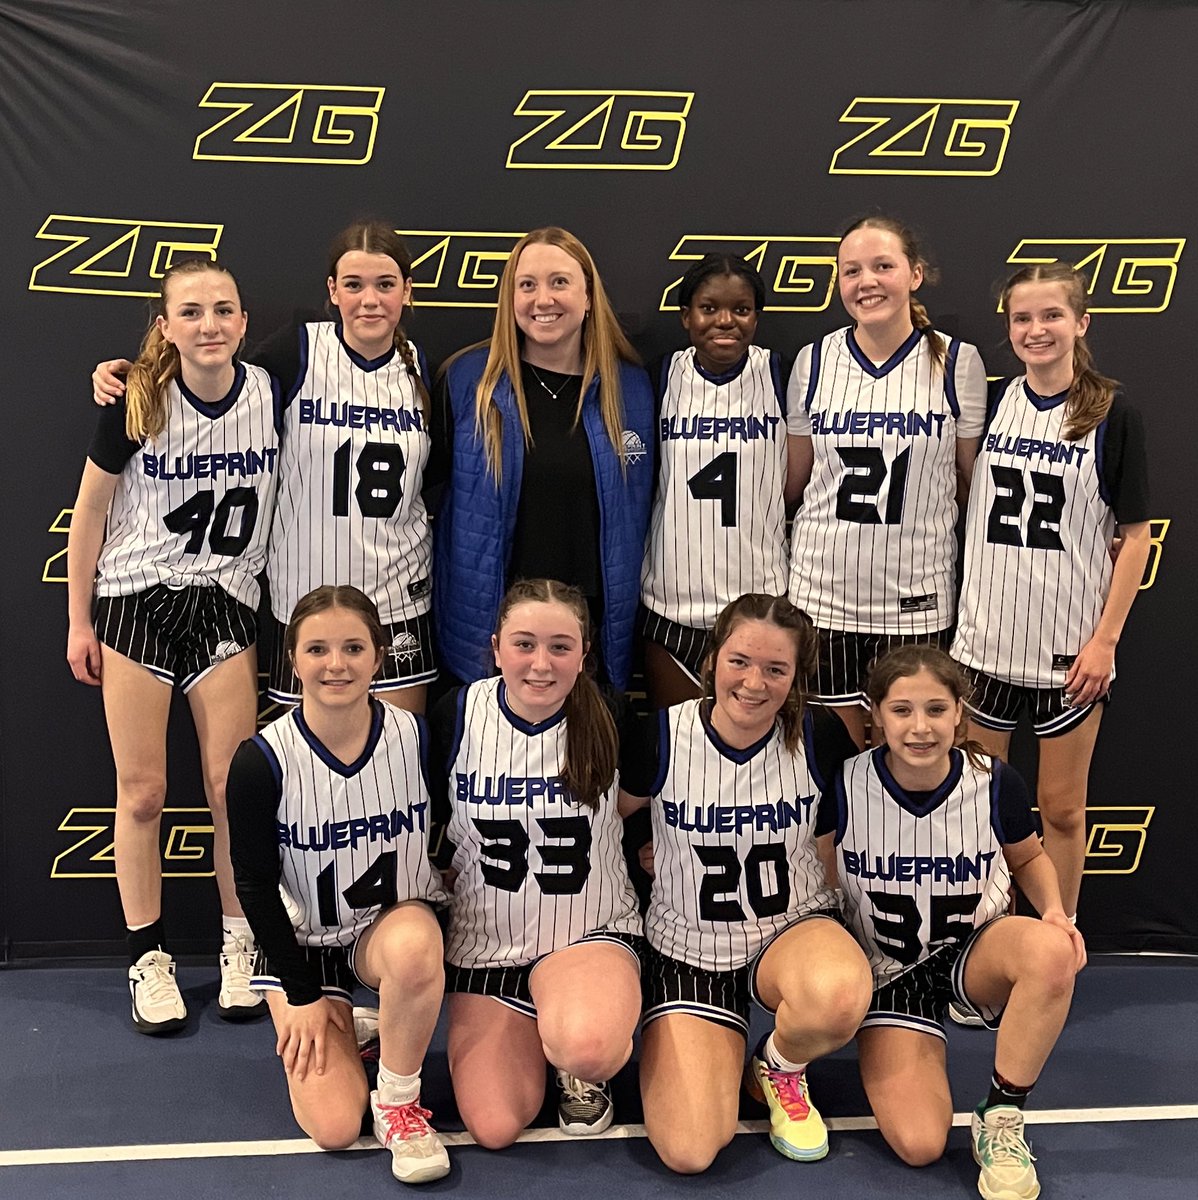 @BlueprintBasket has 🔥 chemistry to clutch up the dub today!! #ZGQueen 👑 What an incredible team effort by these young ladies!!